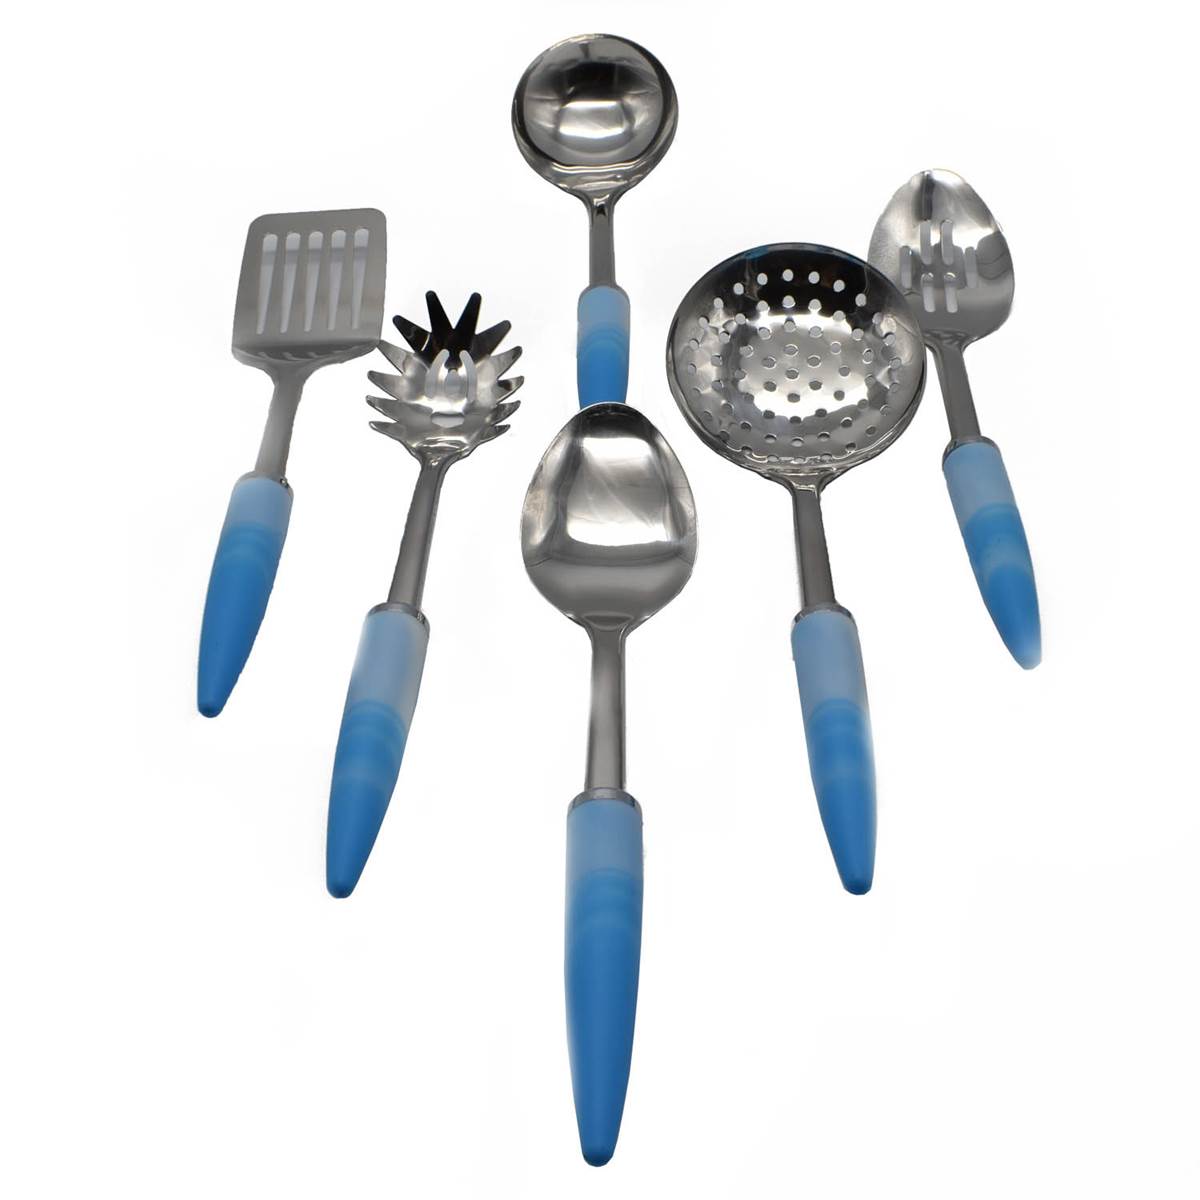 Stainless Steel 7pc Kitchen Utensil, Gadgets, Tool Set (K8-7-A)